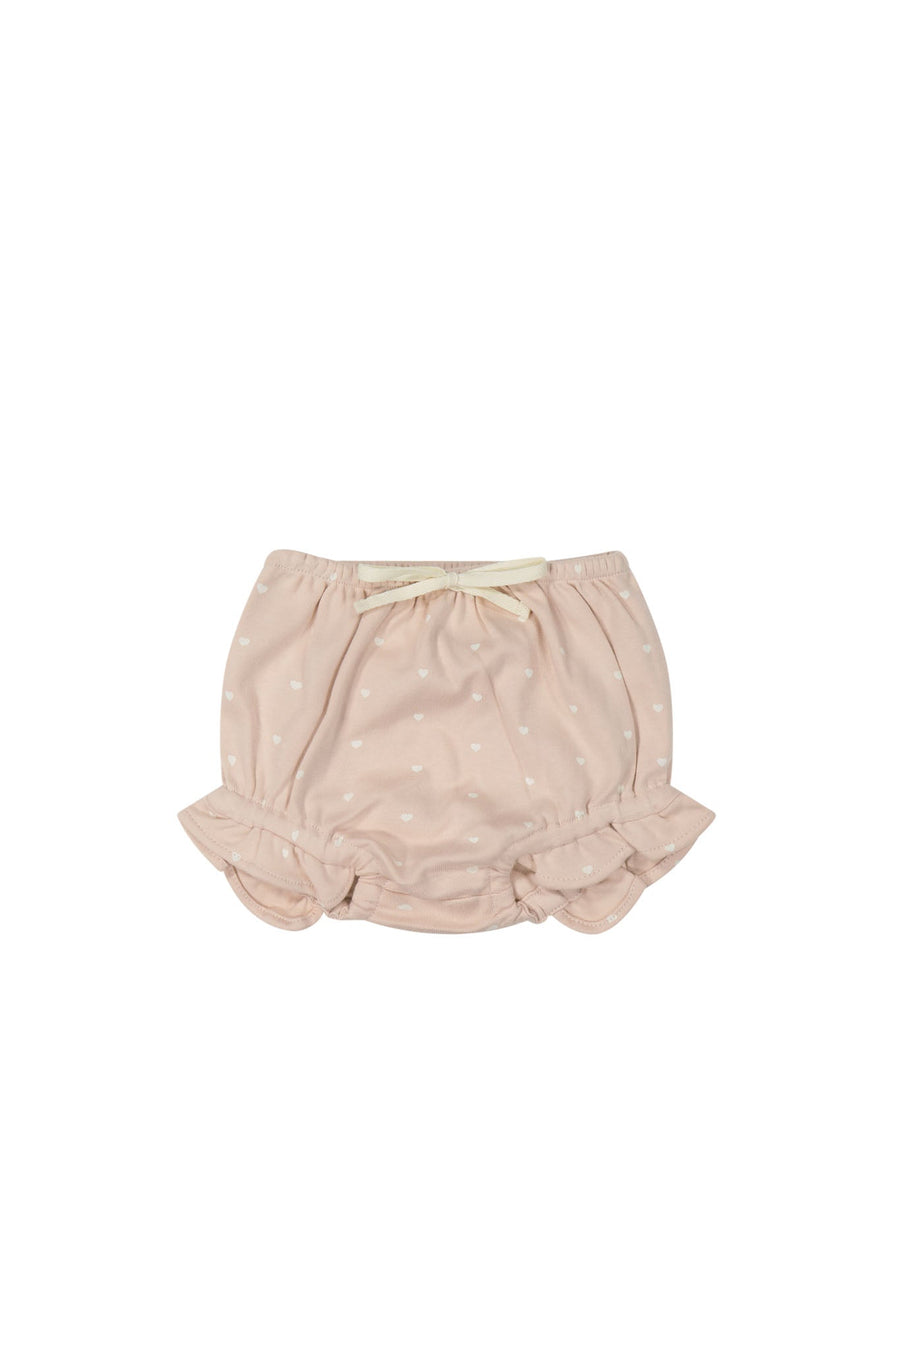 Organic Cotton Frill Bloomer - Mon Amour Rose Childrens Bloomer from Jamie Kay USA